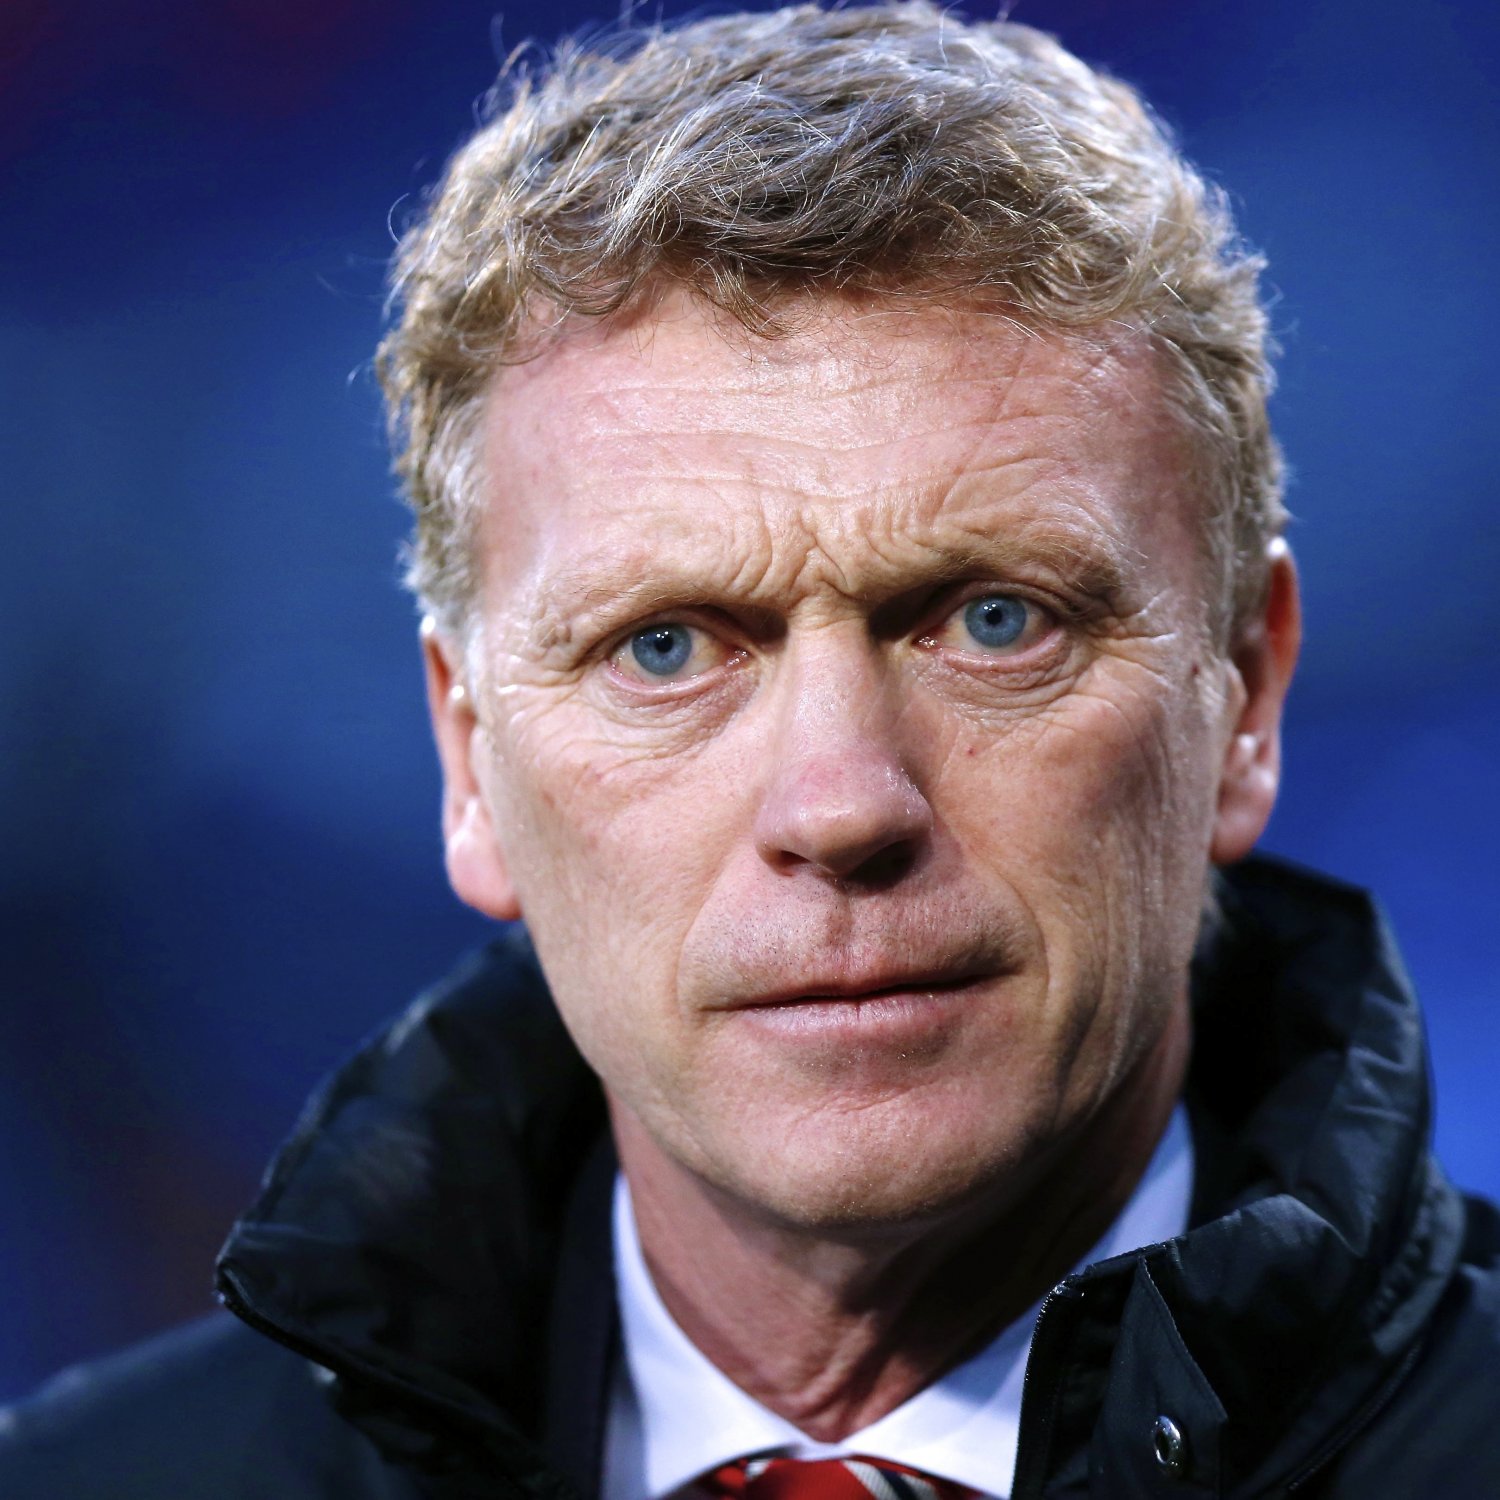 David Moyes Rumours: Latest Buzz and Speculation on Manchester United ...